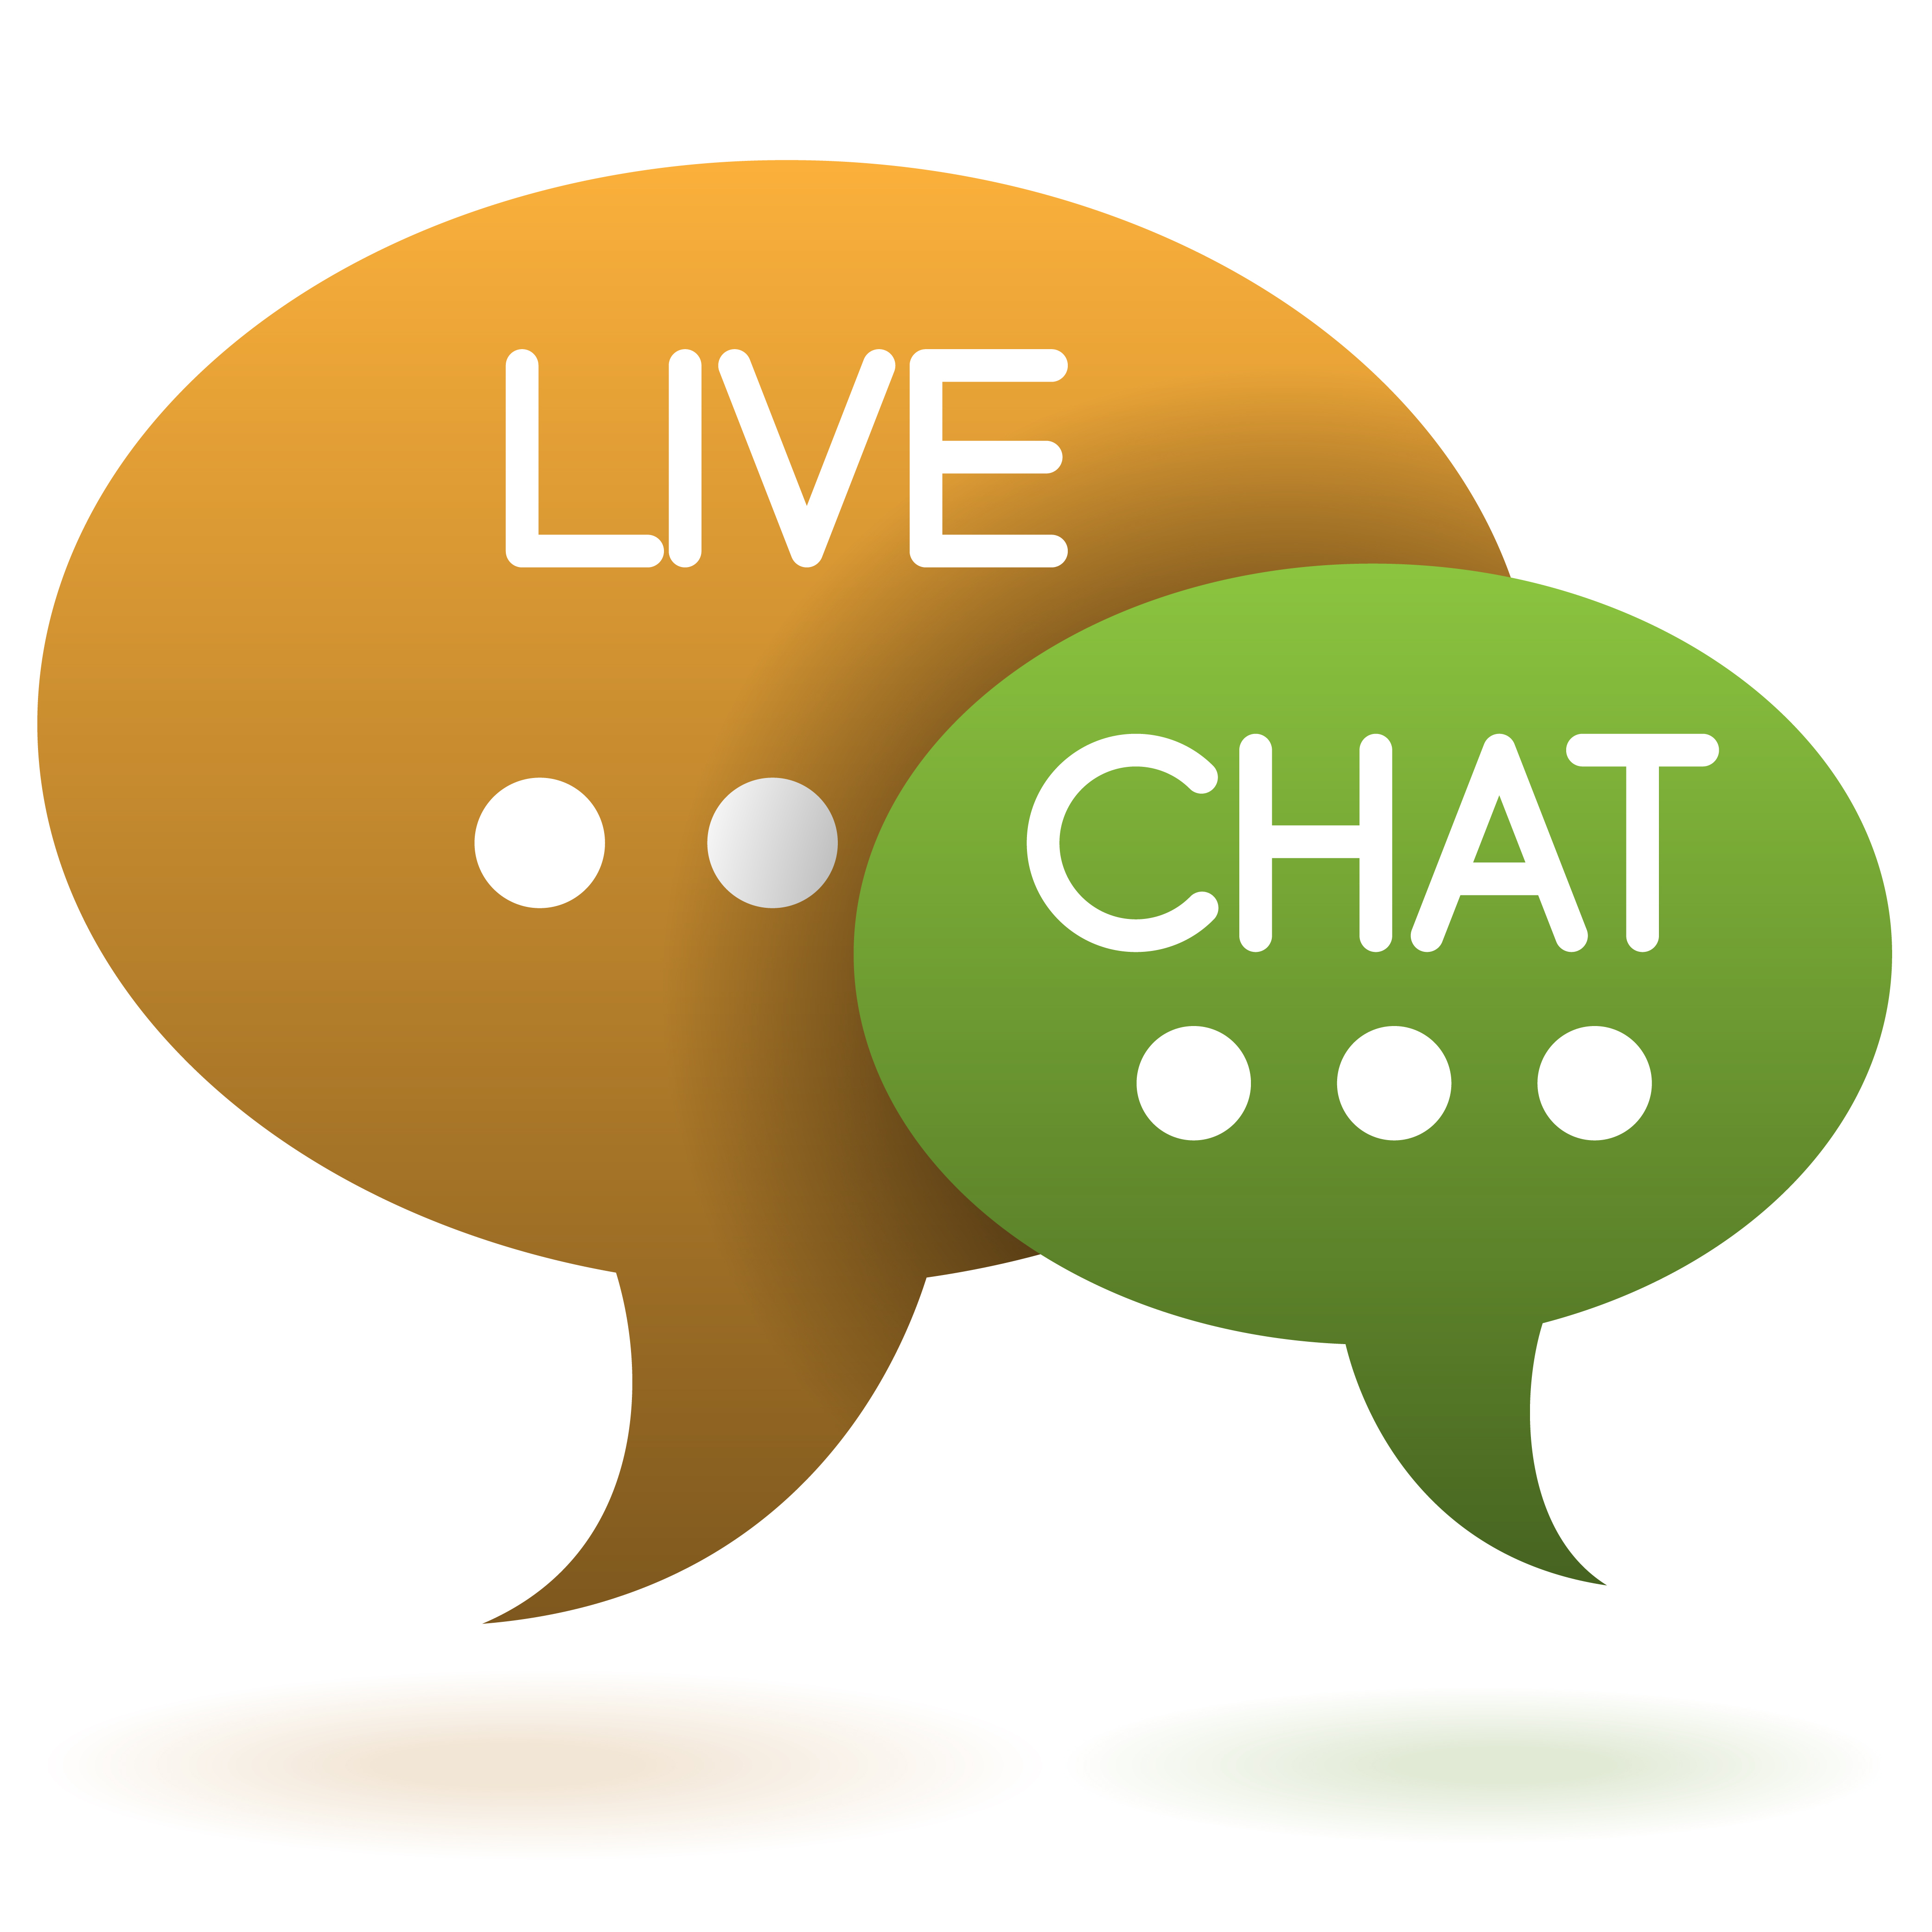 64 live chat.